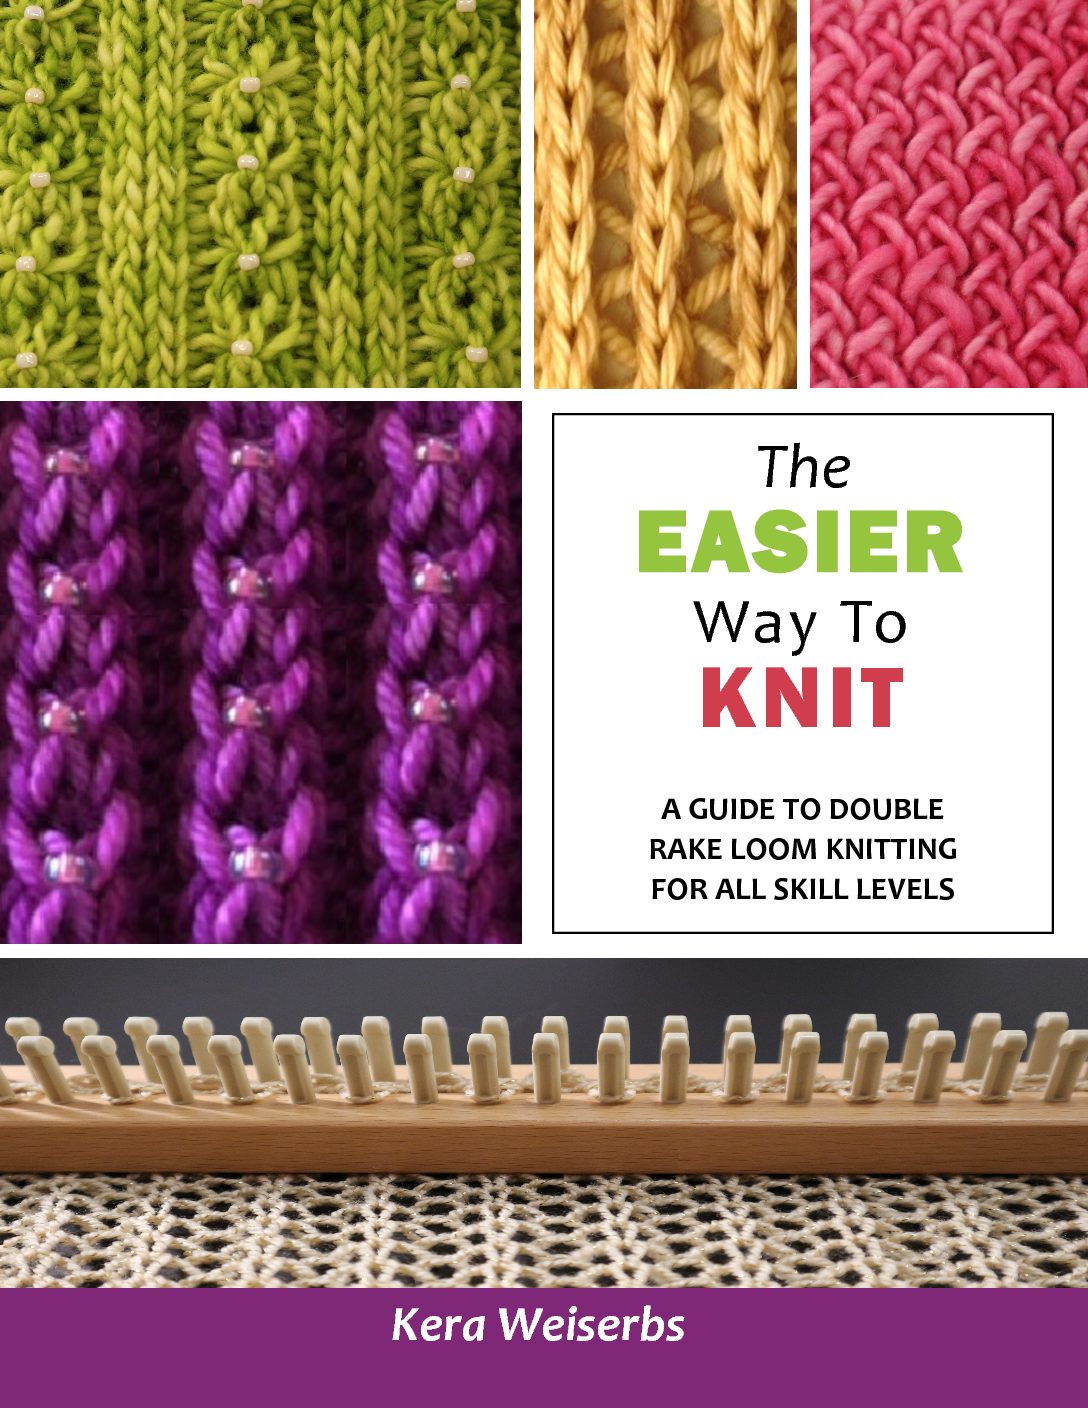 The EASIER WAY To KNIT